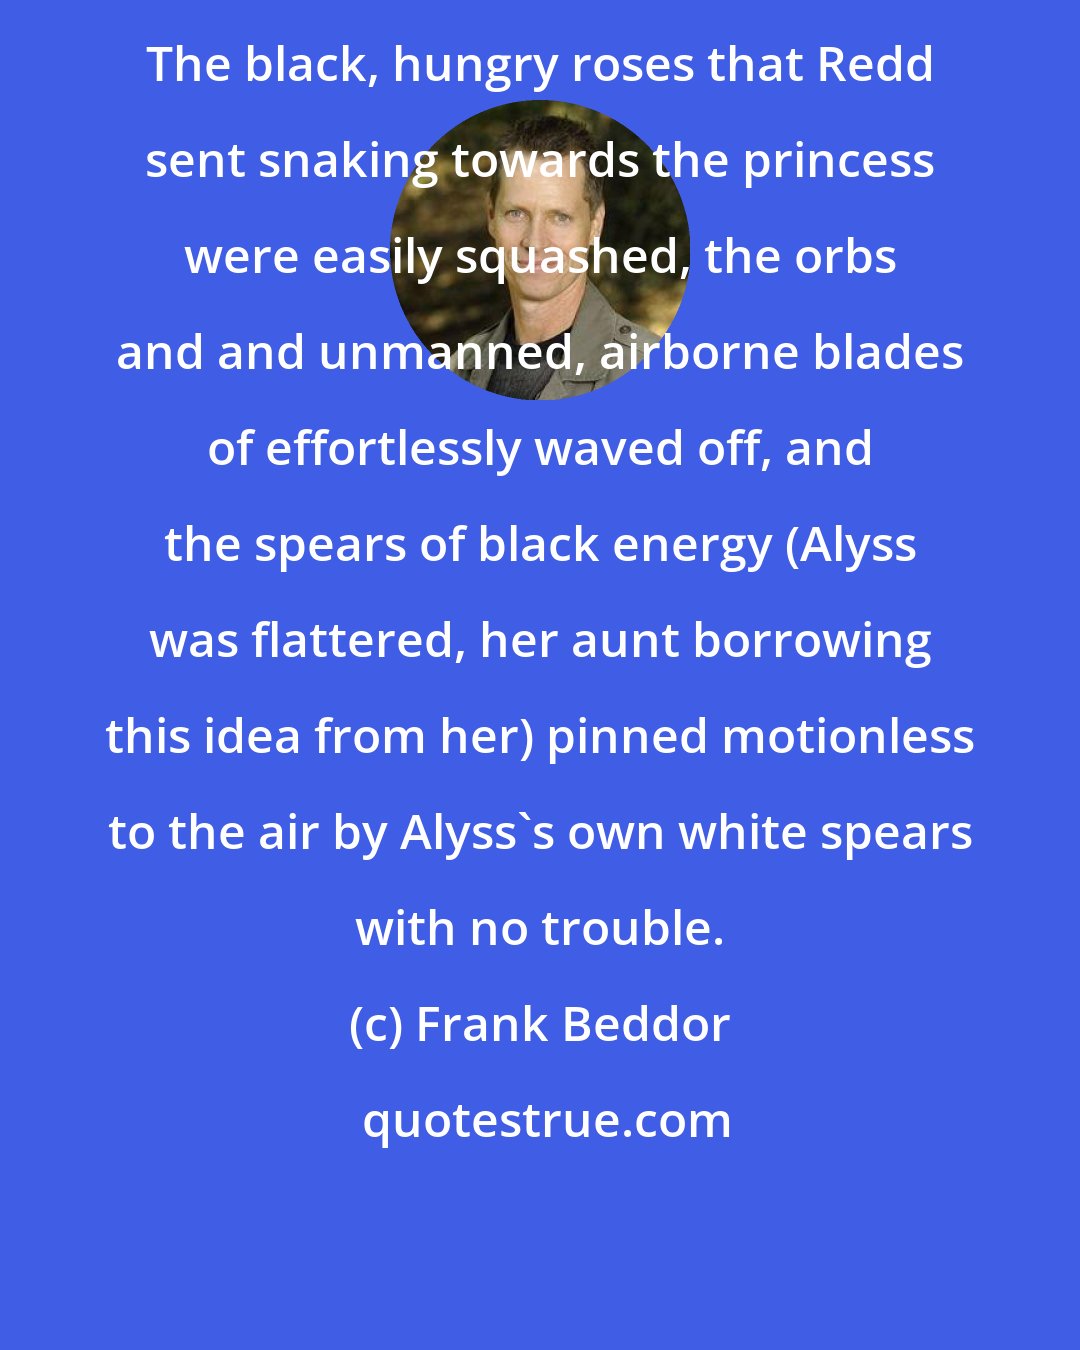 Frank Beddor: The black, hungry roses that Redd sent snaking towards the princess were easily squashed, the orbs and and unmanned, airborne blades of effortlessly waved off, and the spears of black energy (Alyss was flattered, her aunt borrowing this idea from her) pinned motionless to the air by Alyss's own white spears with no trouble.